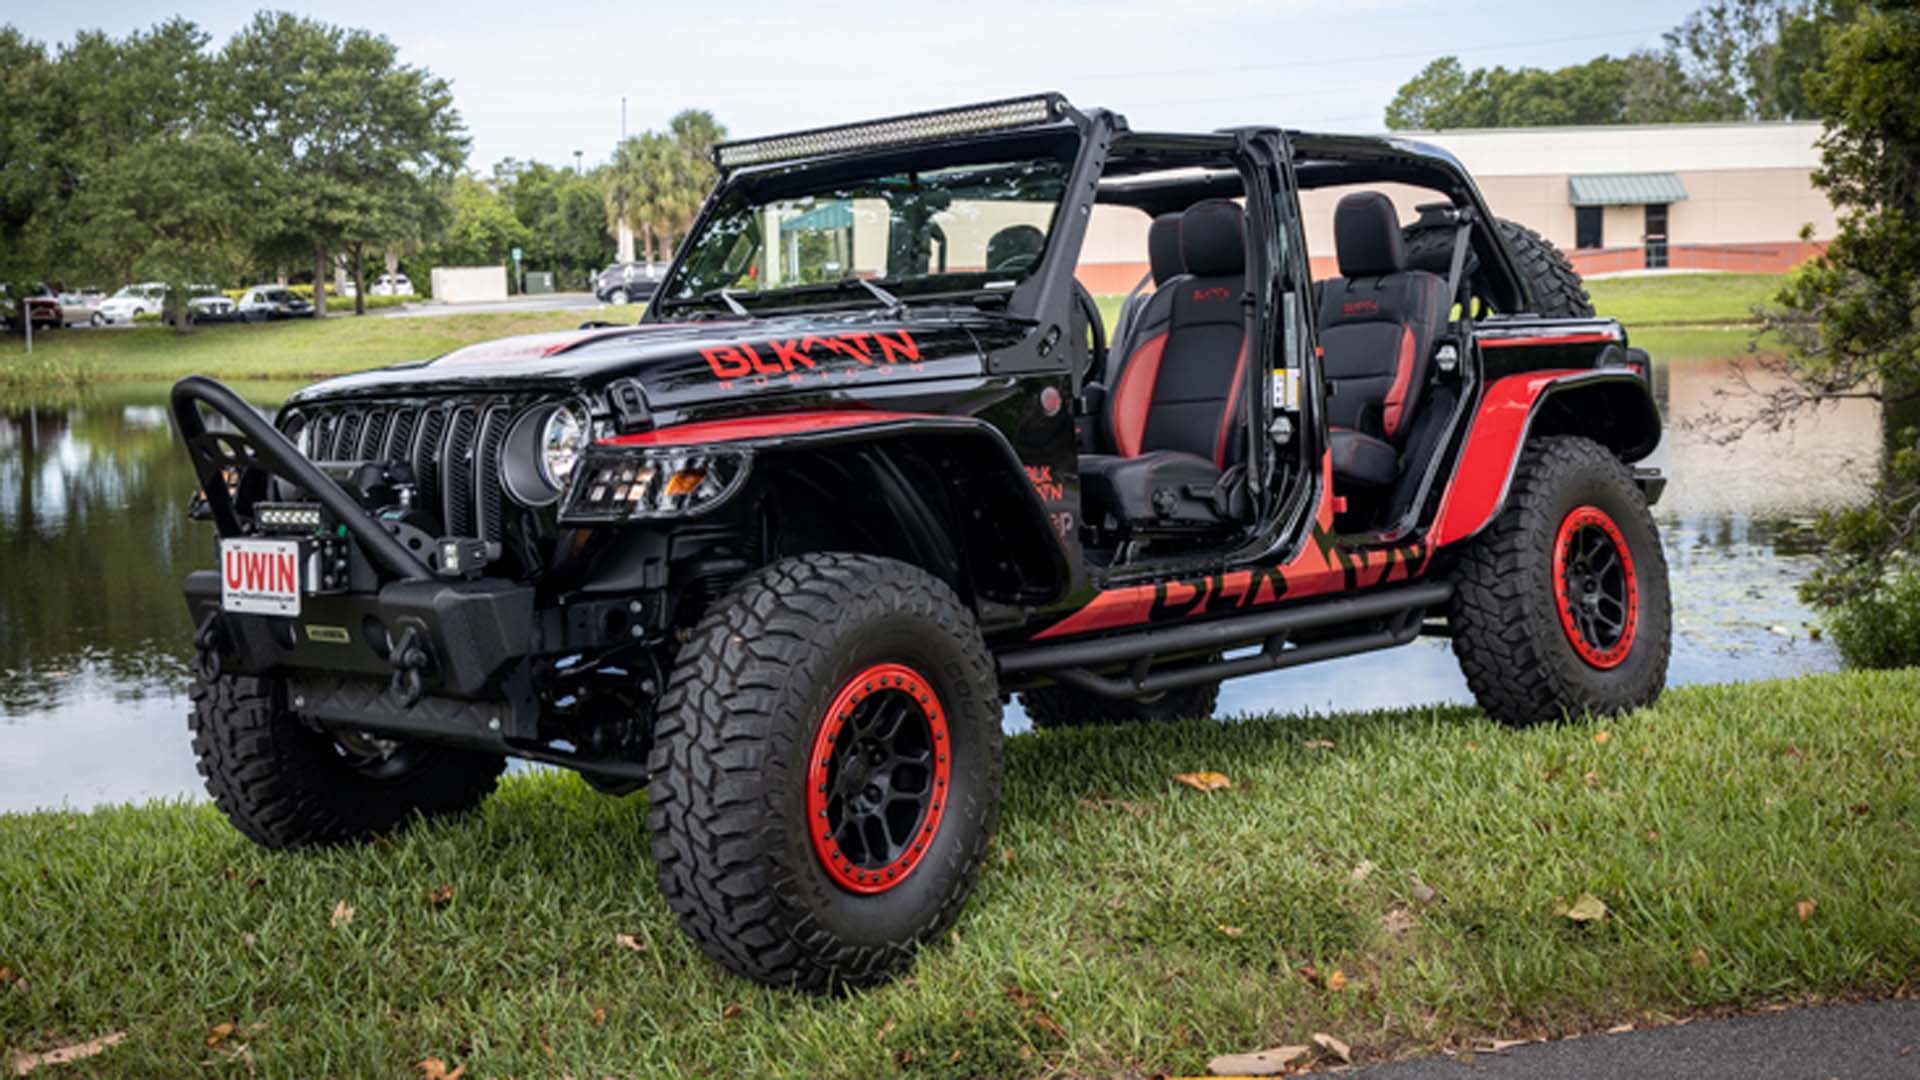 SEMA-Style Black Mountain Jeep Wrangler JLUR Is A Serious Off-Roader